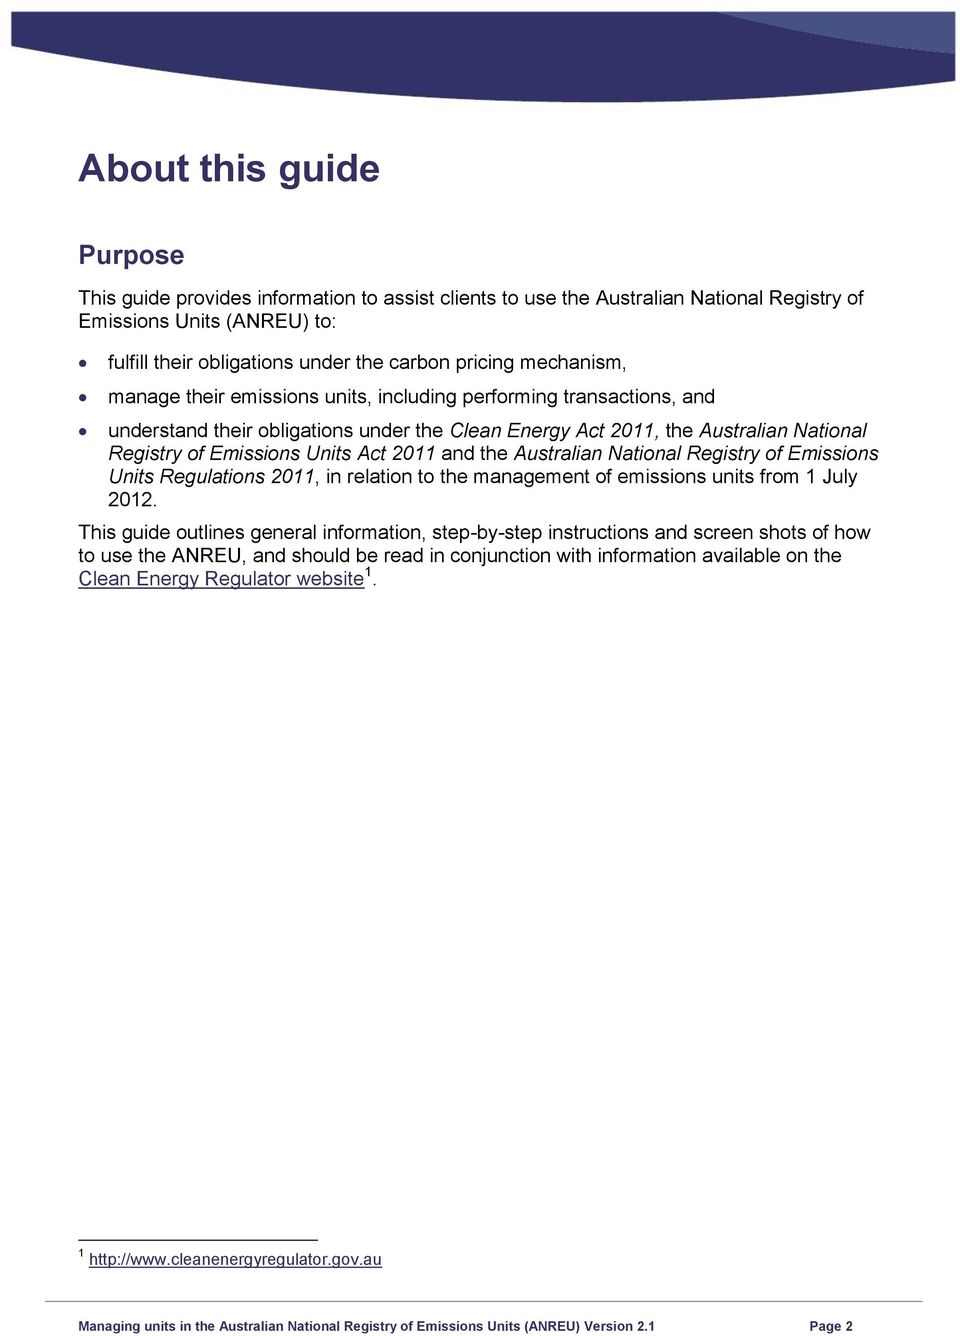 2011 and the Australian National Registry of Emissions Units Regulations 2011, in relation to the management of emissions units from 1 July 2012.